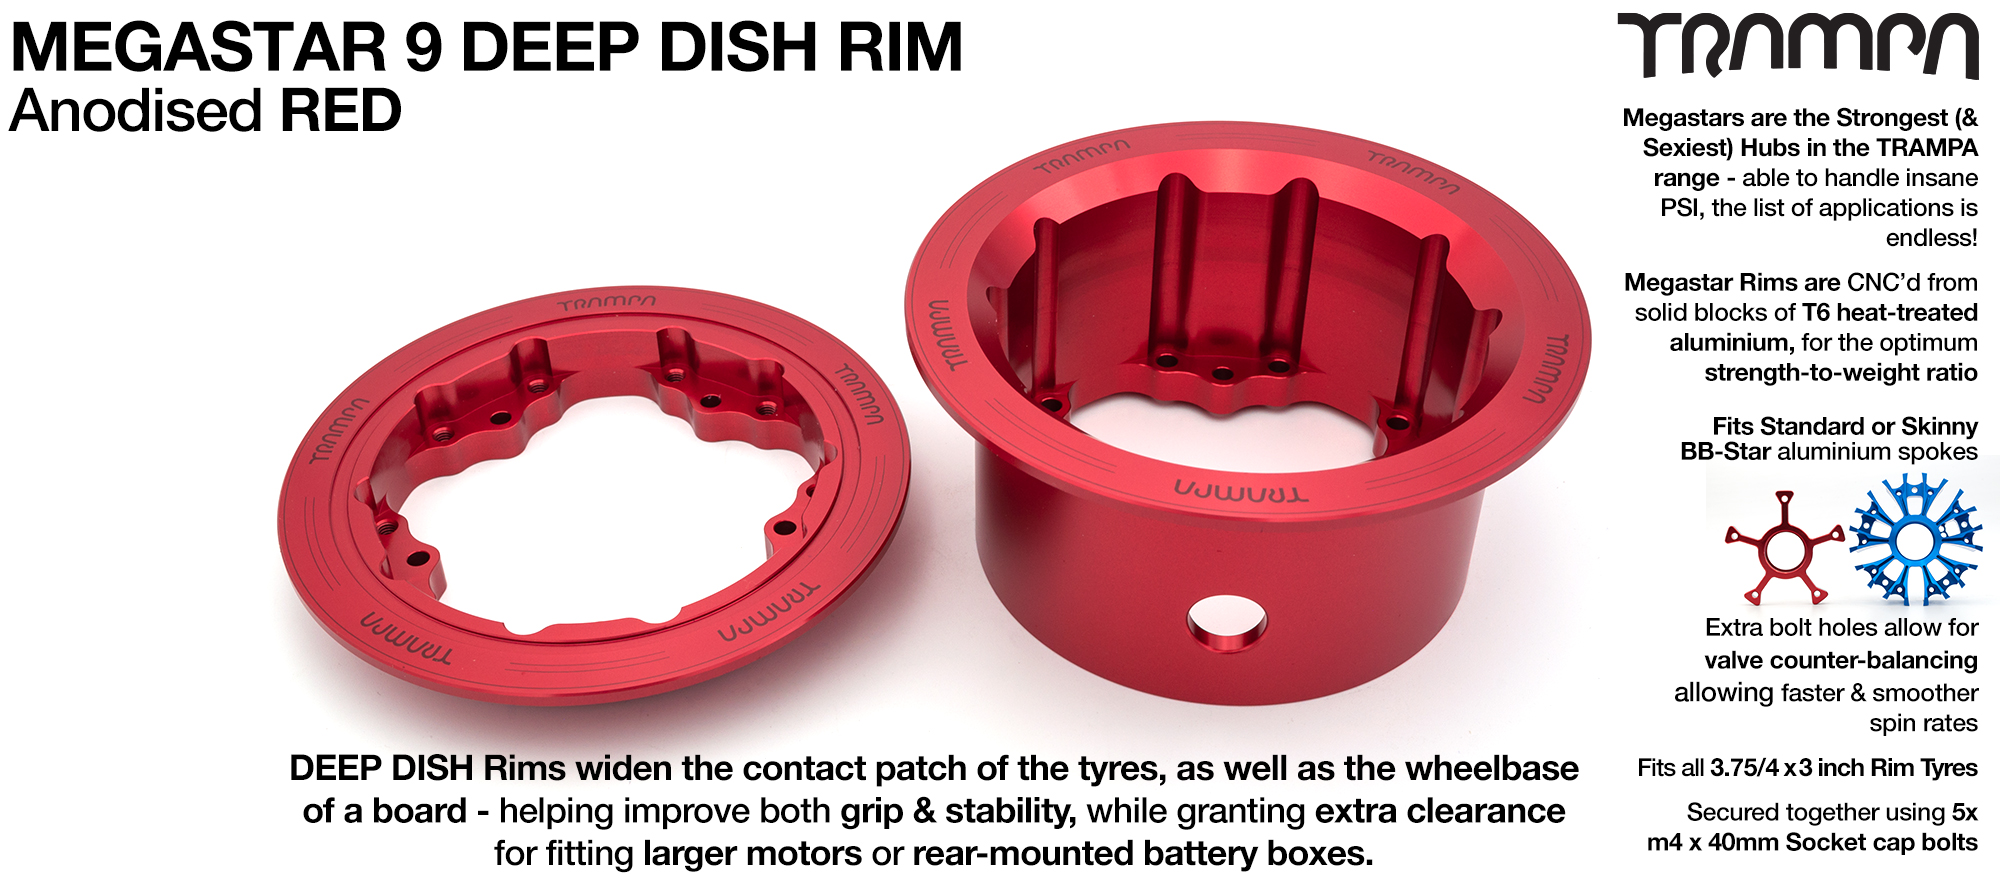 MEGASTAR 9 DD Rims Measure 3.75/4x 3 Inch. The Bearings are positioned DEEP-DISH OFF-SET & accept 3.75 & 4 Inch Rim Tyres - RED